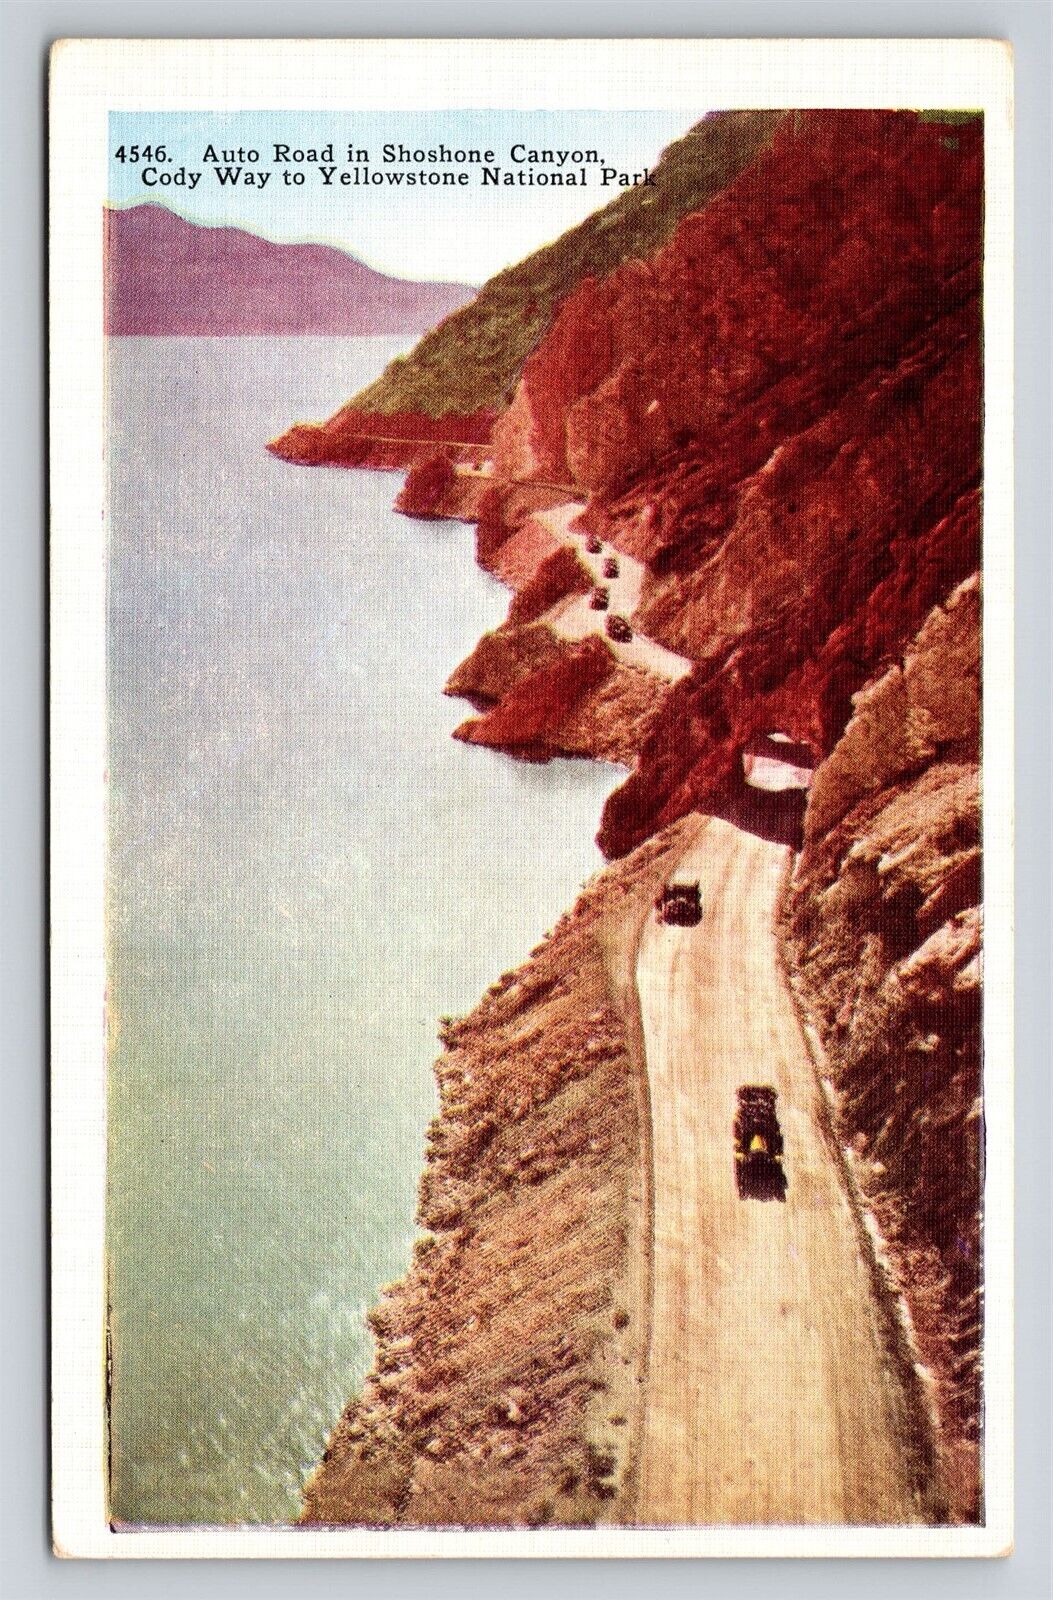 Auto Road in Shoshone Canyon Yellowstone National Park Cody Way WY Postcard HHT